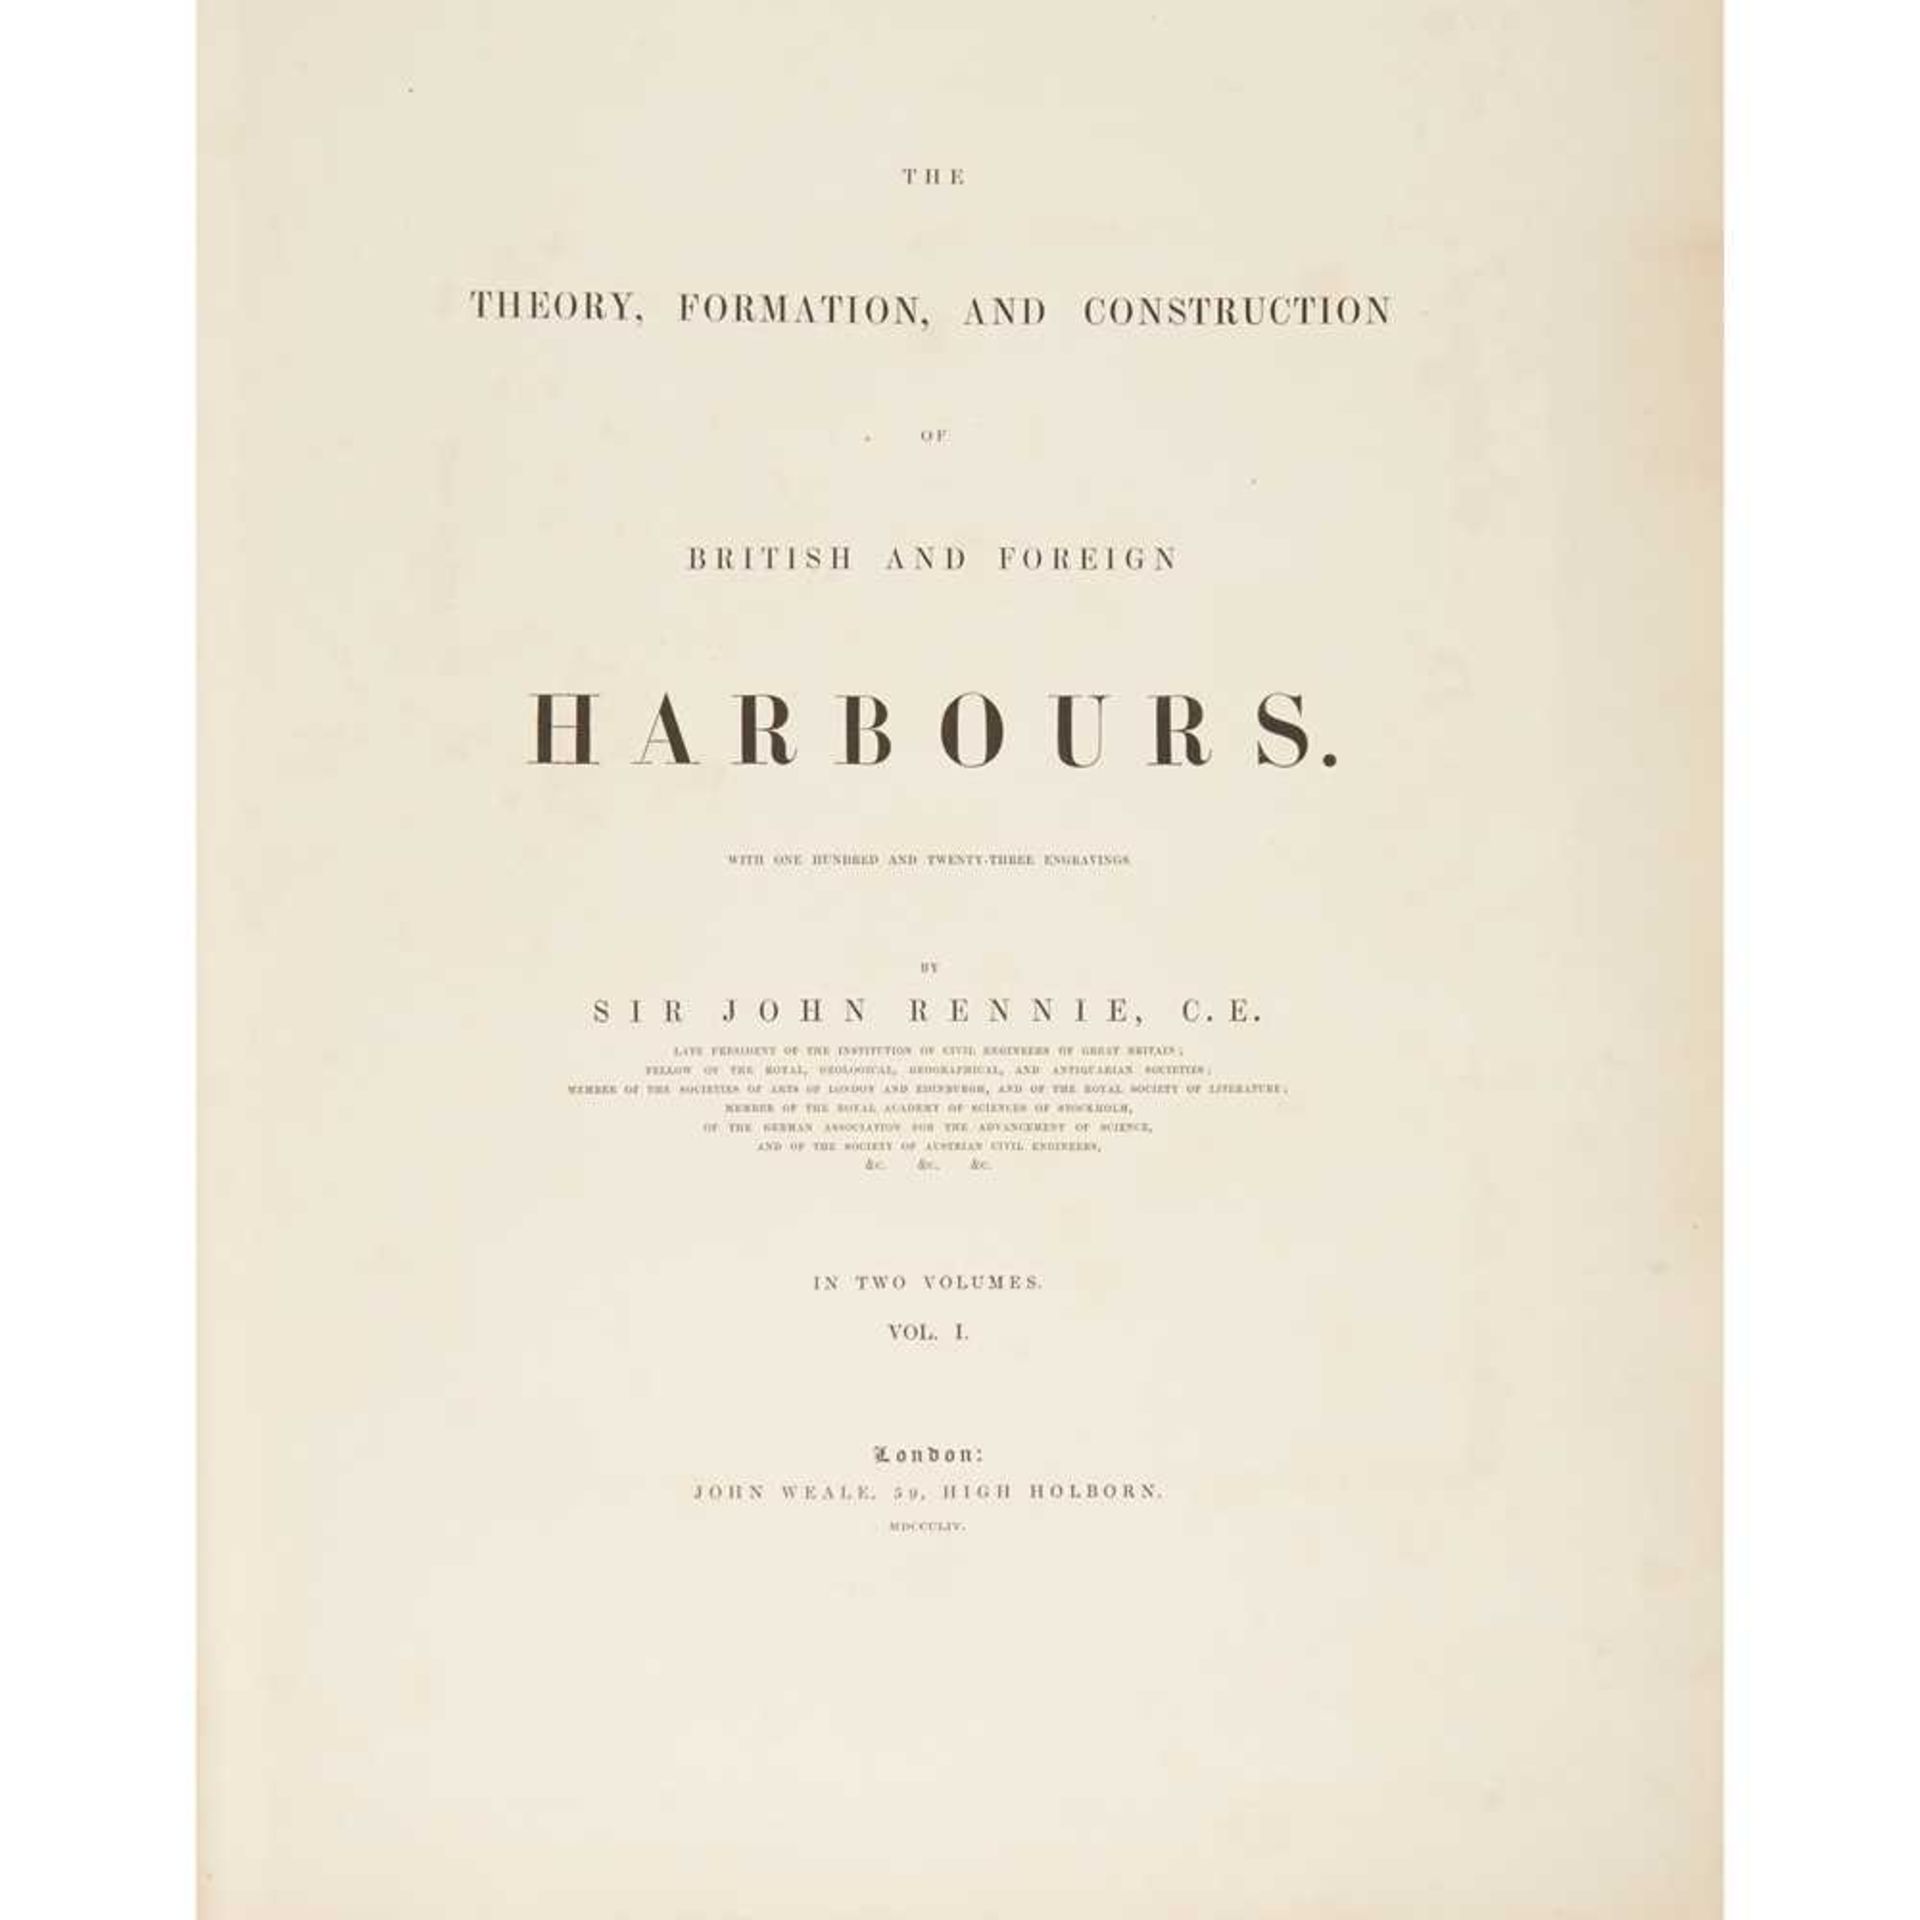 Rennie, Sir John The Theory, Formation and Construction of British and Foreign Harbours - Image 3 of 3